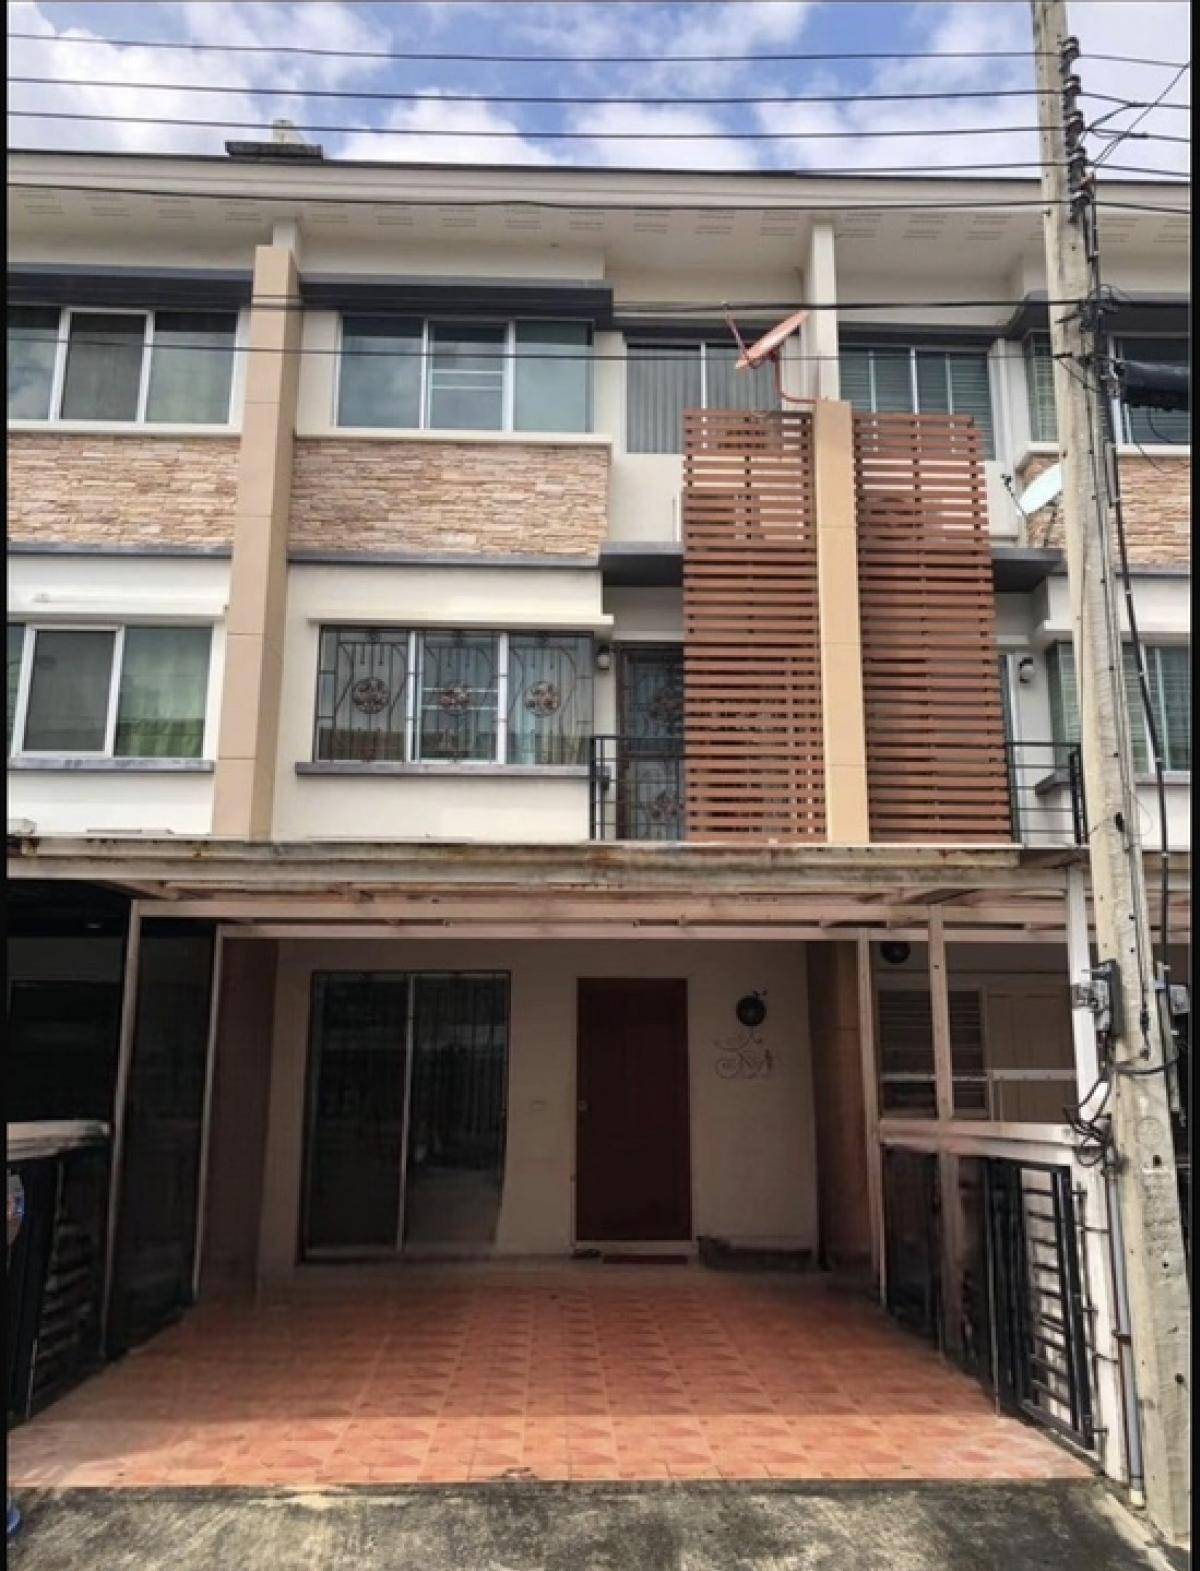 For RentTownhouseYothinpattana,CDC : 23,000.-For rent, 3-story townhome with furniture, Town Plus Village, Town Plus Kaset Nawamin. Behind Boonthavorn Kaset, near the expressway, convenient travel.